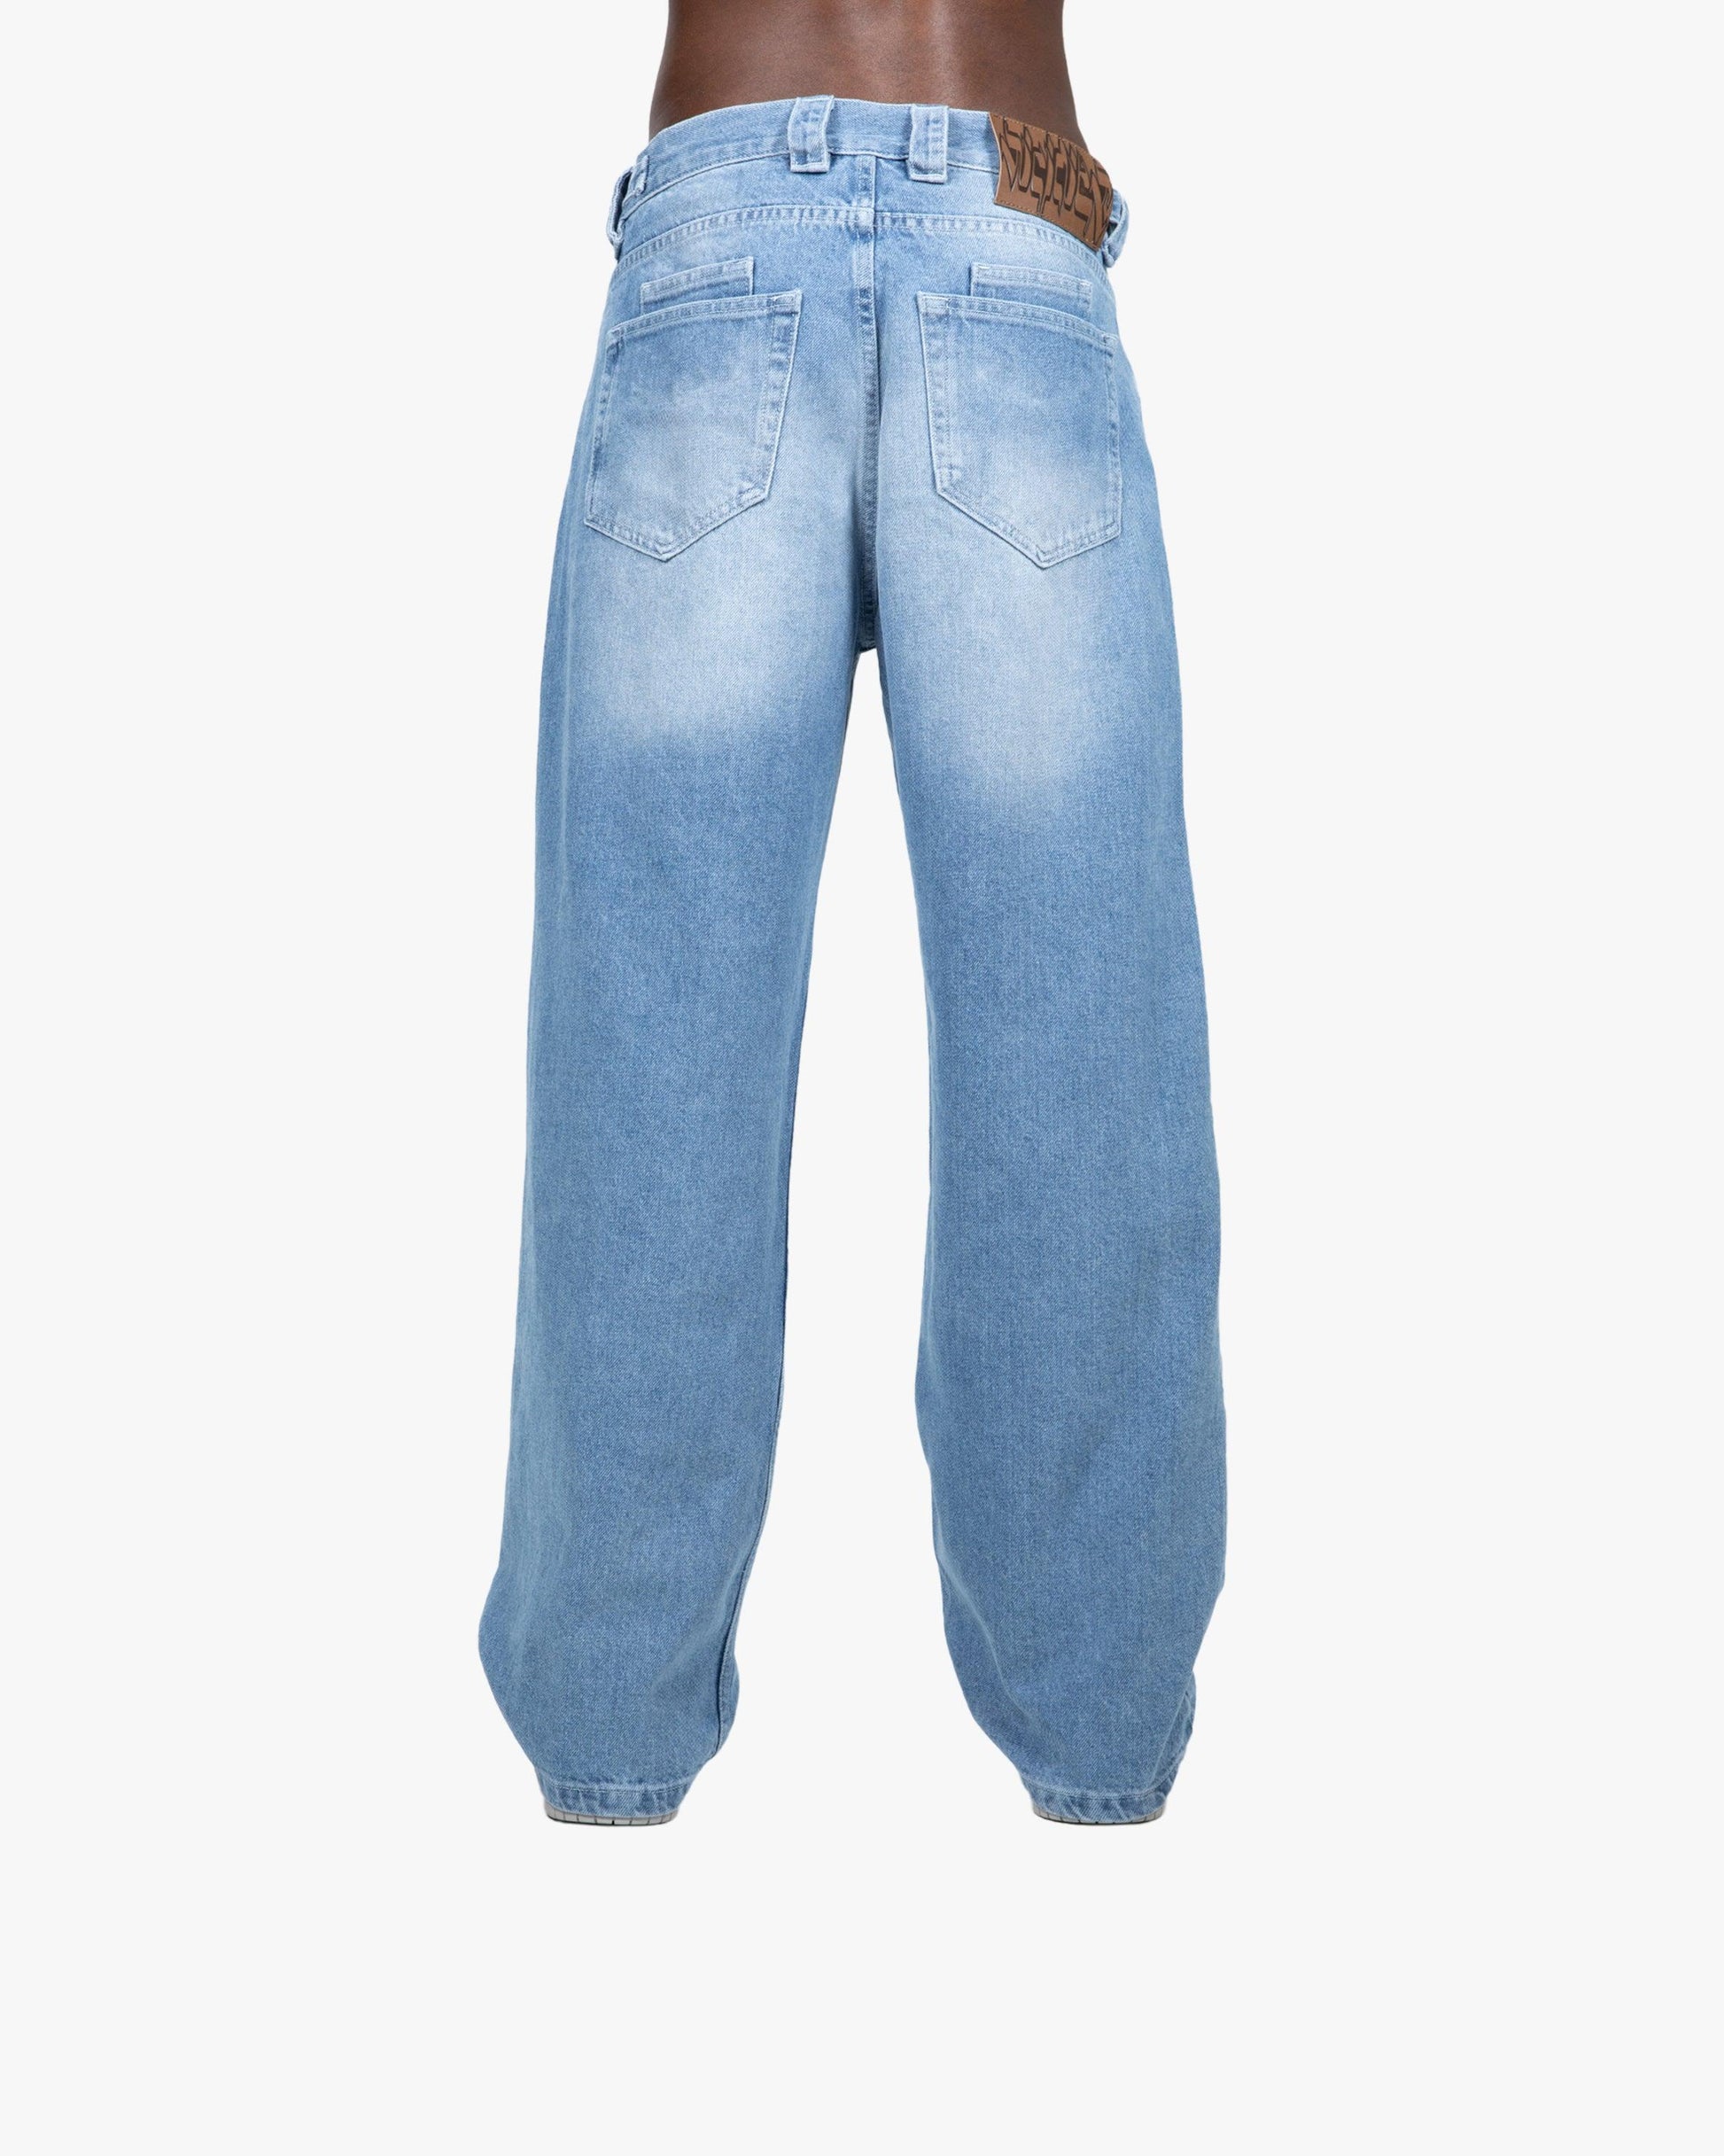 OUTLINED MIRAGE DENIM LIGHT BLUE / WHITE - VICINITY